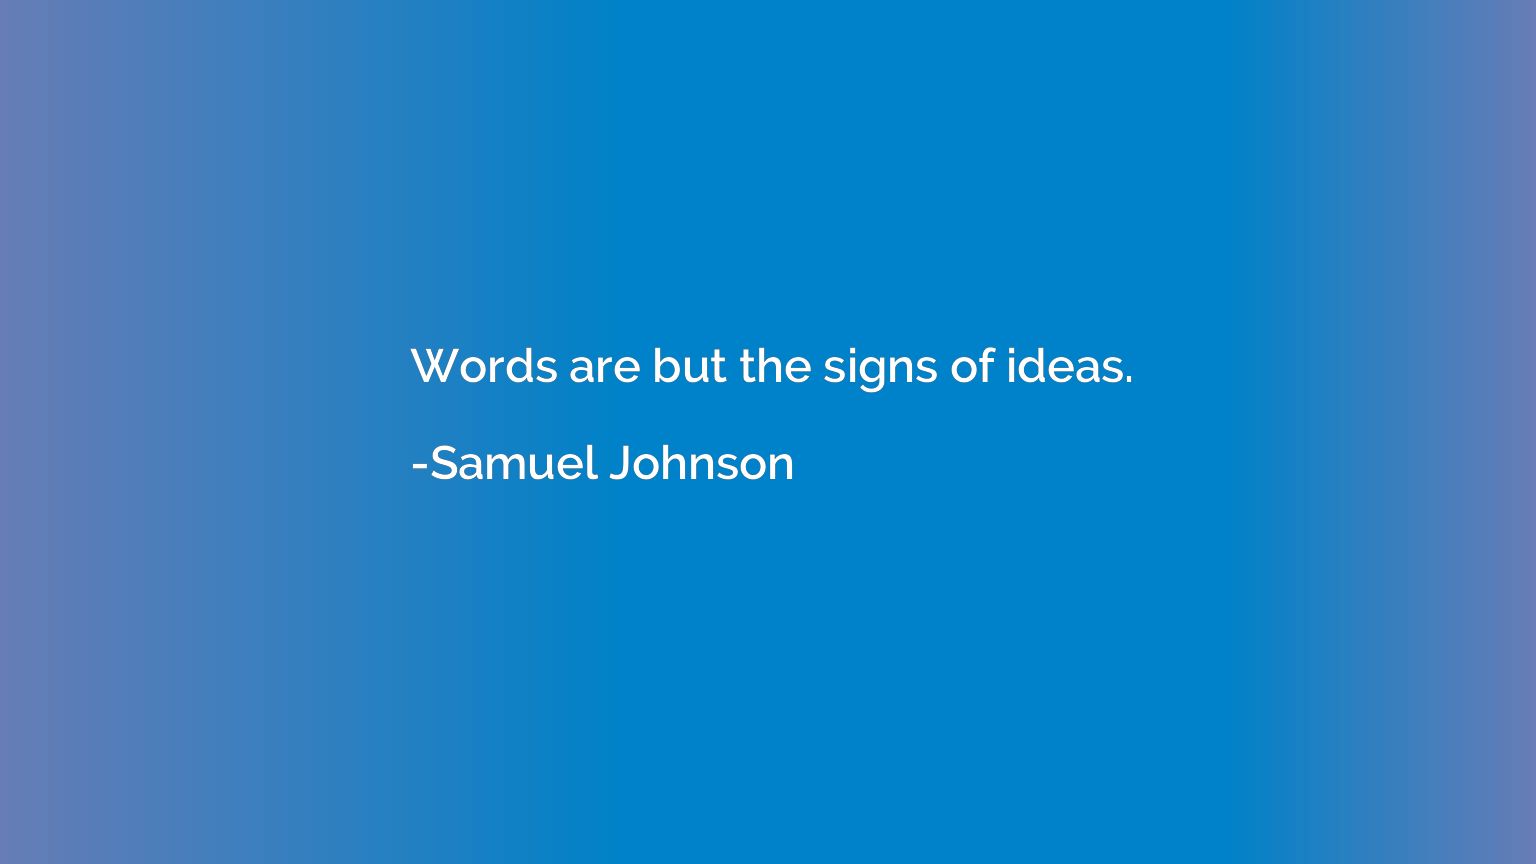 Words are but the signs of ideas.